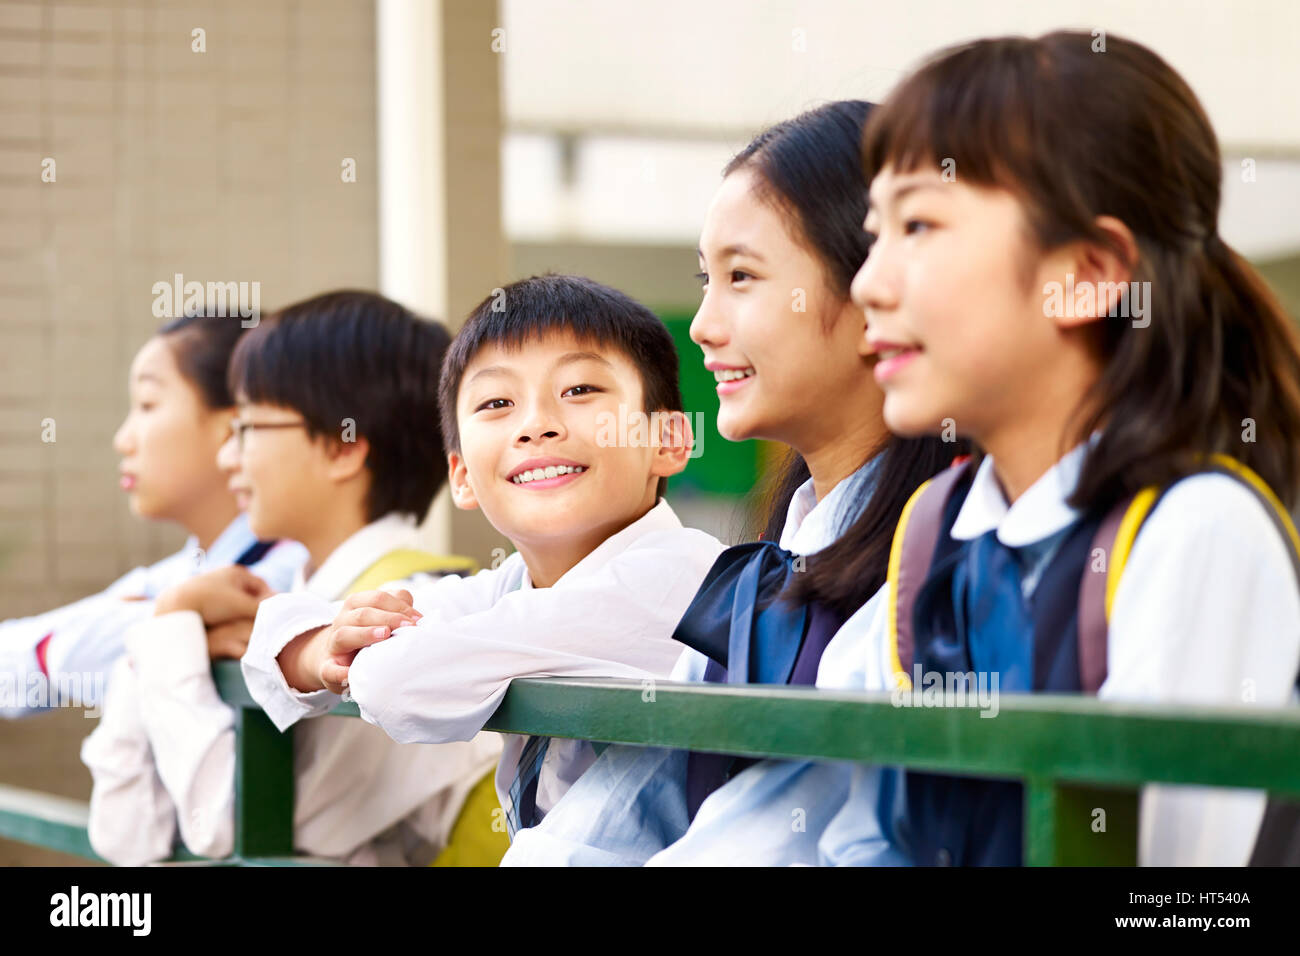 group of asian elementary school children with one boy looking at camera smiling. Stock Photo